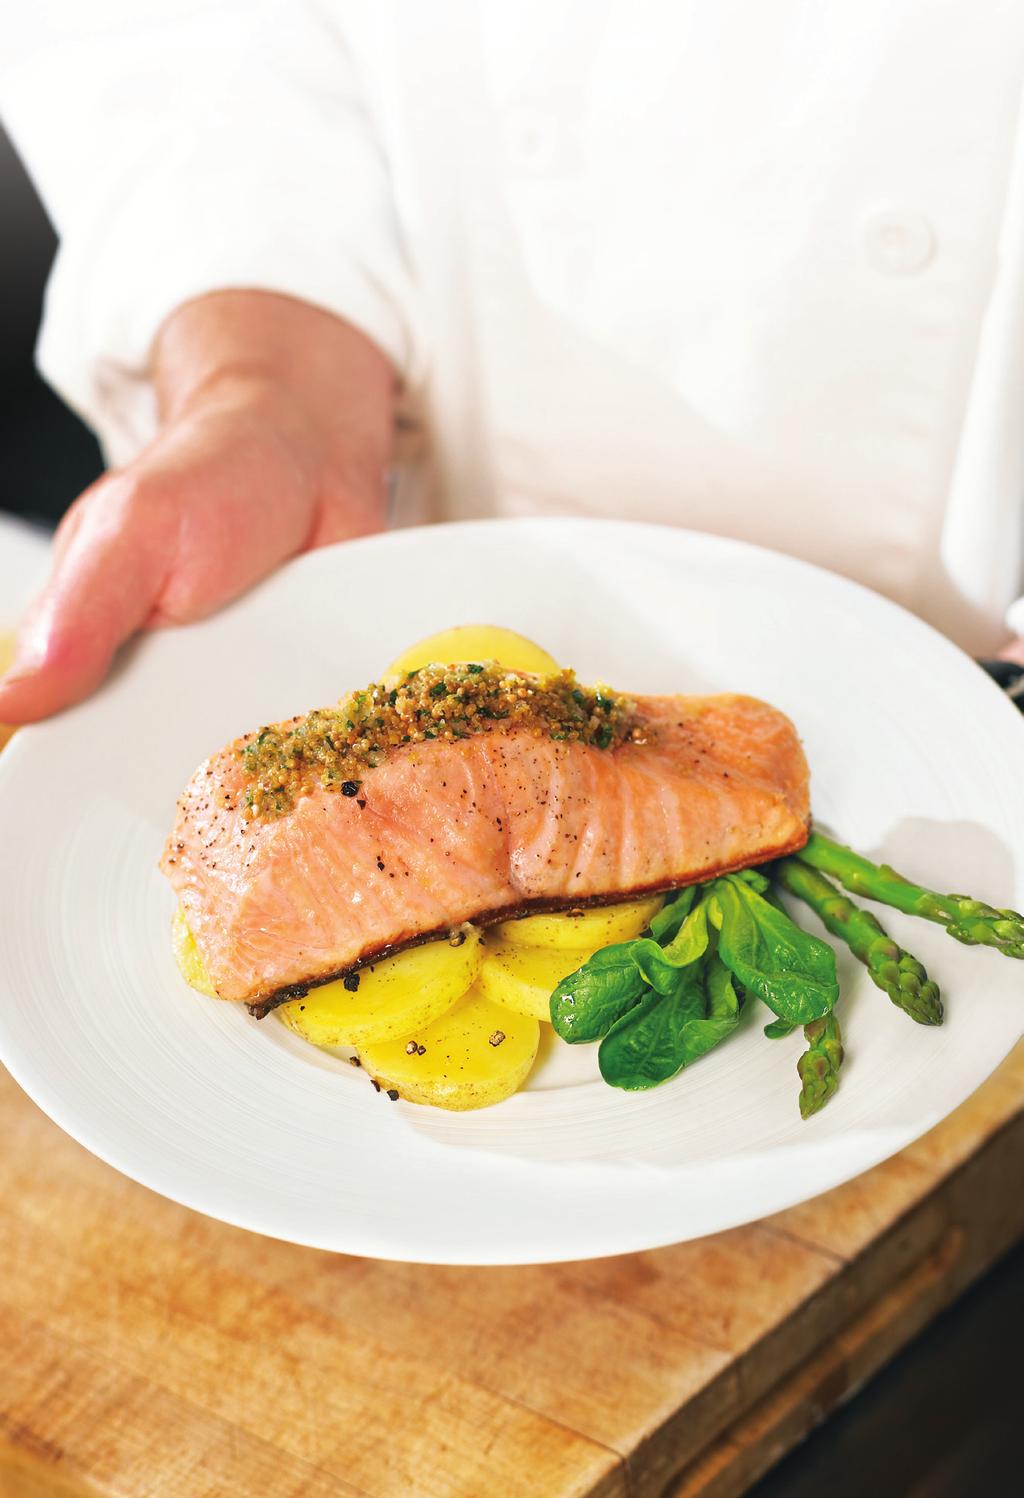 Local salmon. World-class taste. Atlantic Canadian salmon farmers produce a delicious, healthy and affordable food that comes second to none in taste and quality.